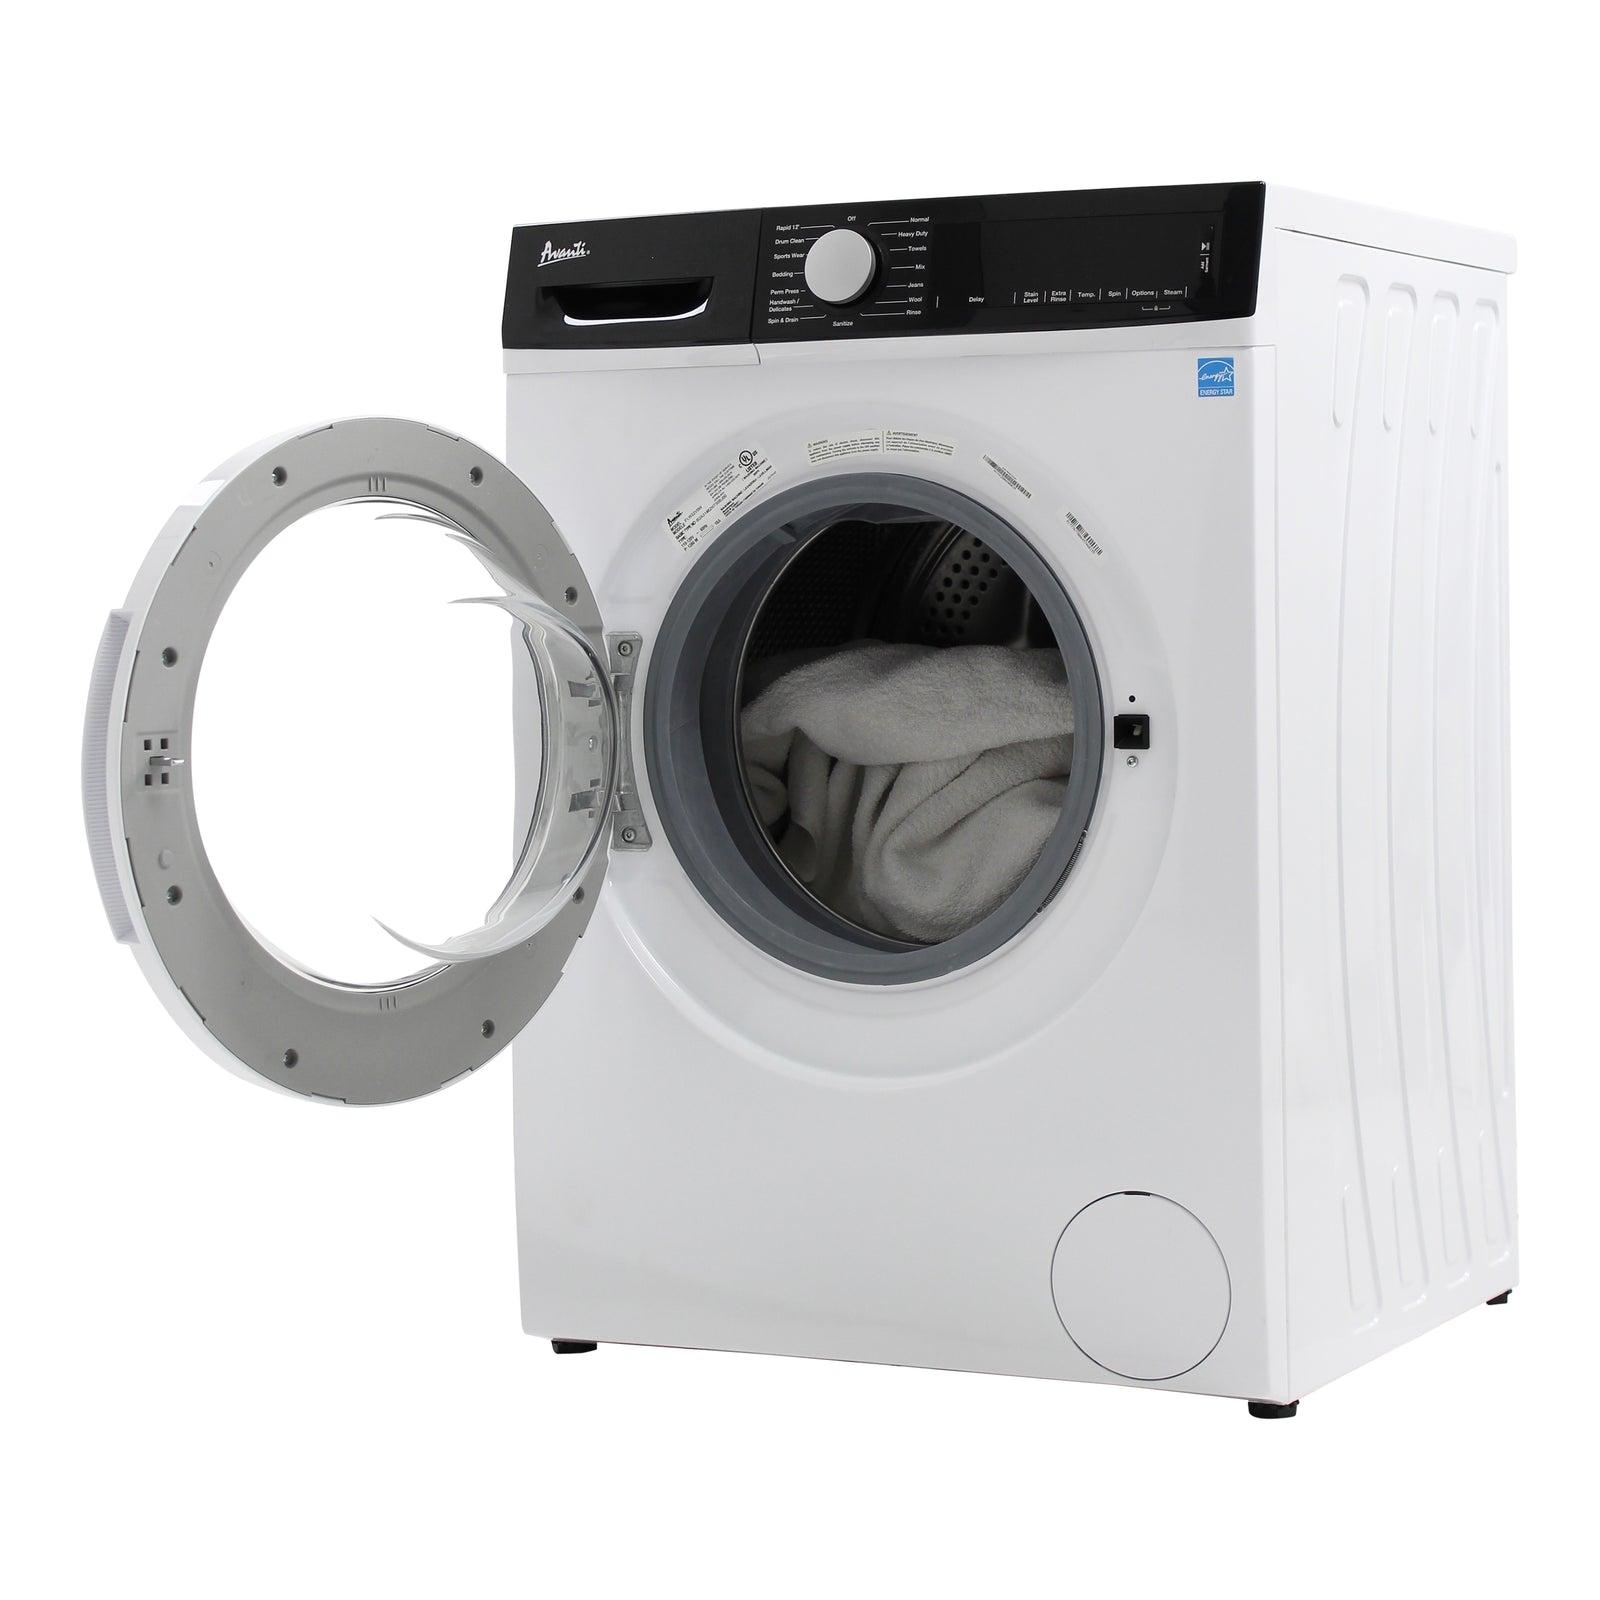 Avanti Front Load Washer - White / 2.2 cu. ft.